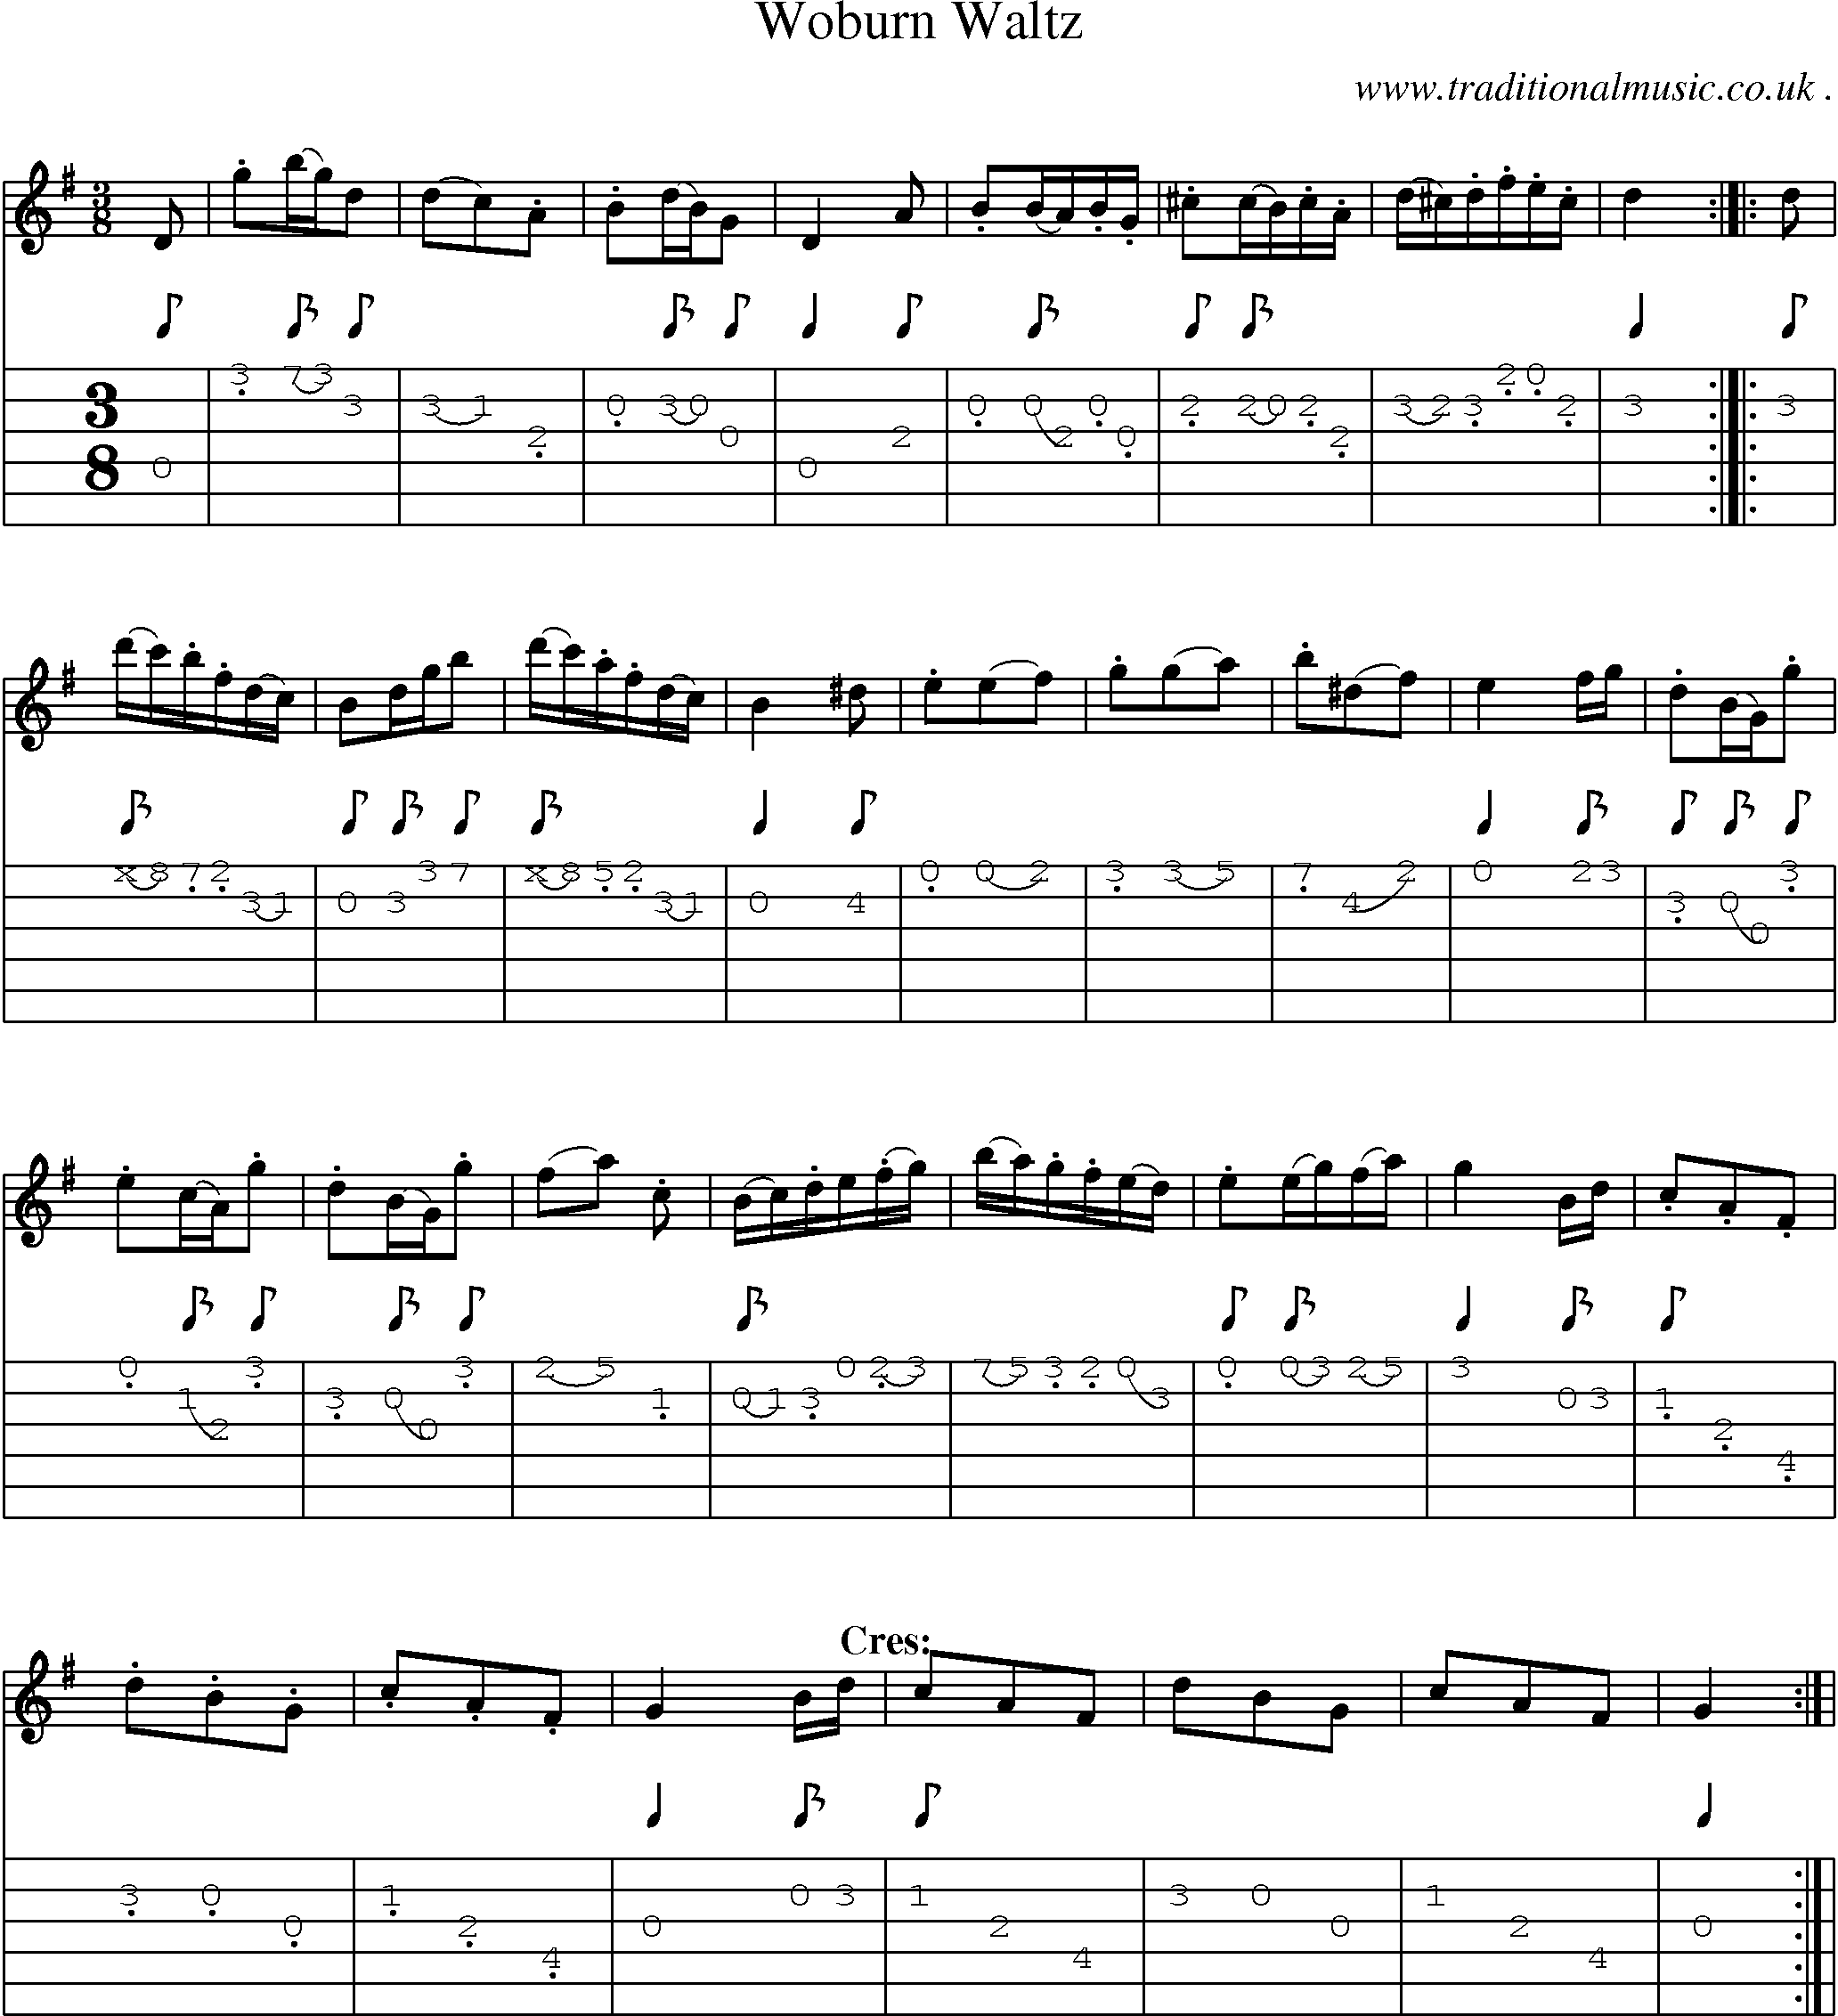 Sheet-Music and Guitar Tabs for Woburn Waltz